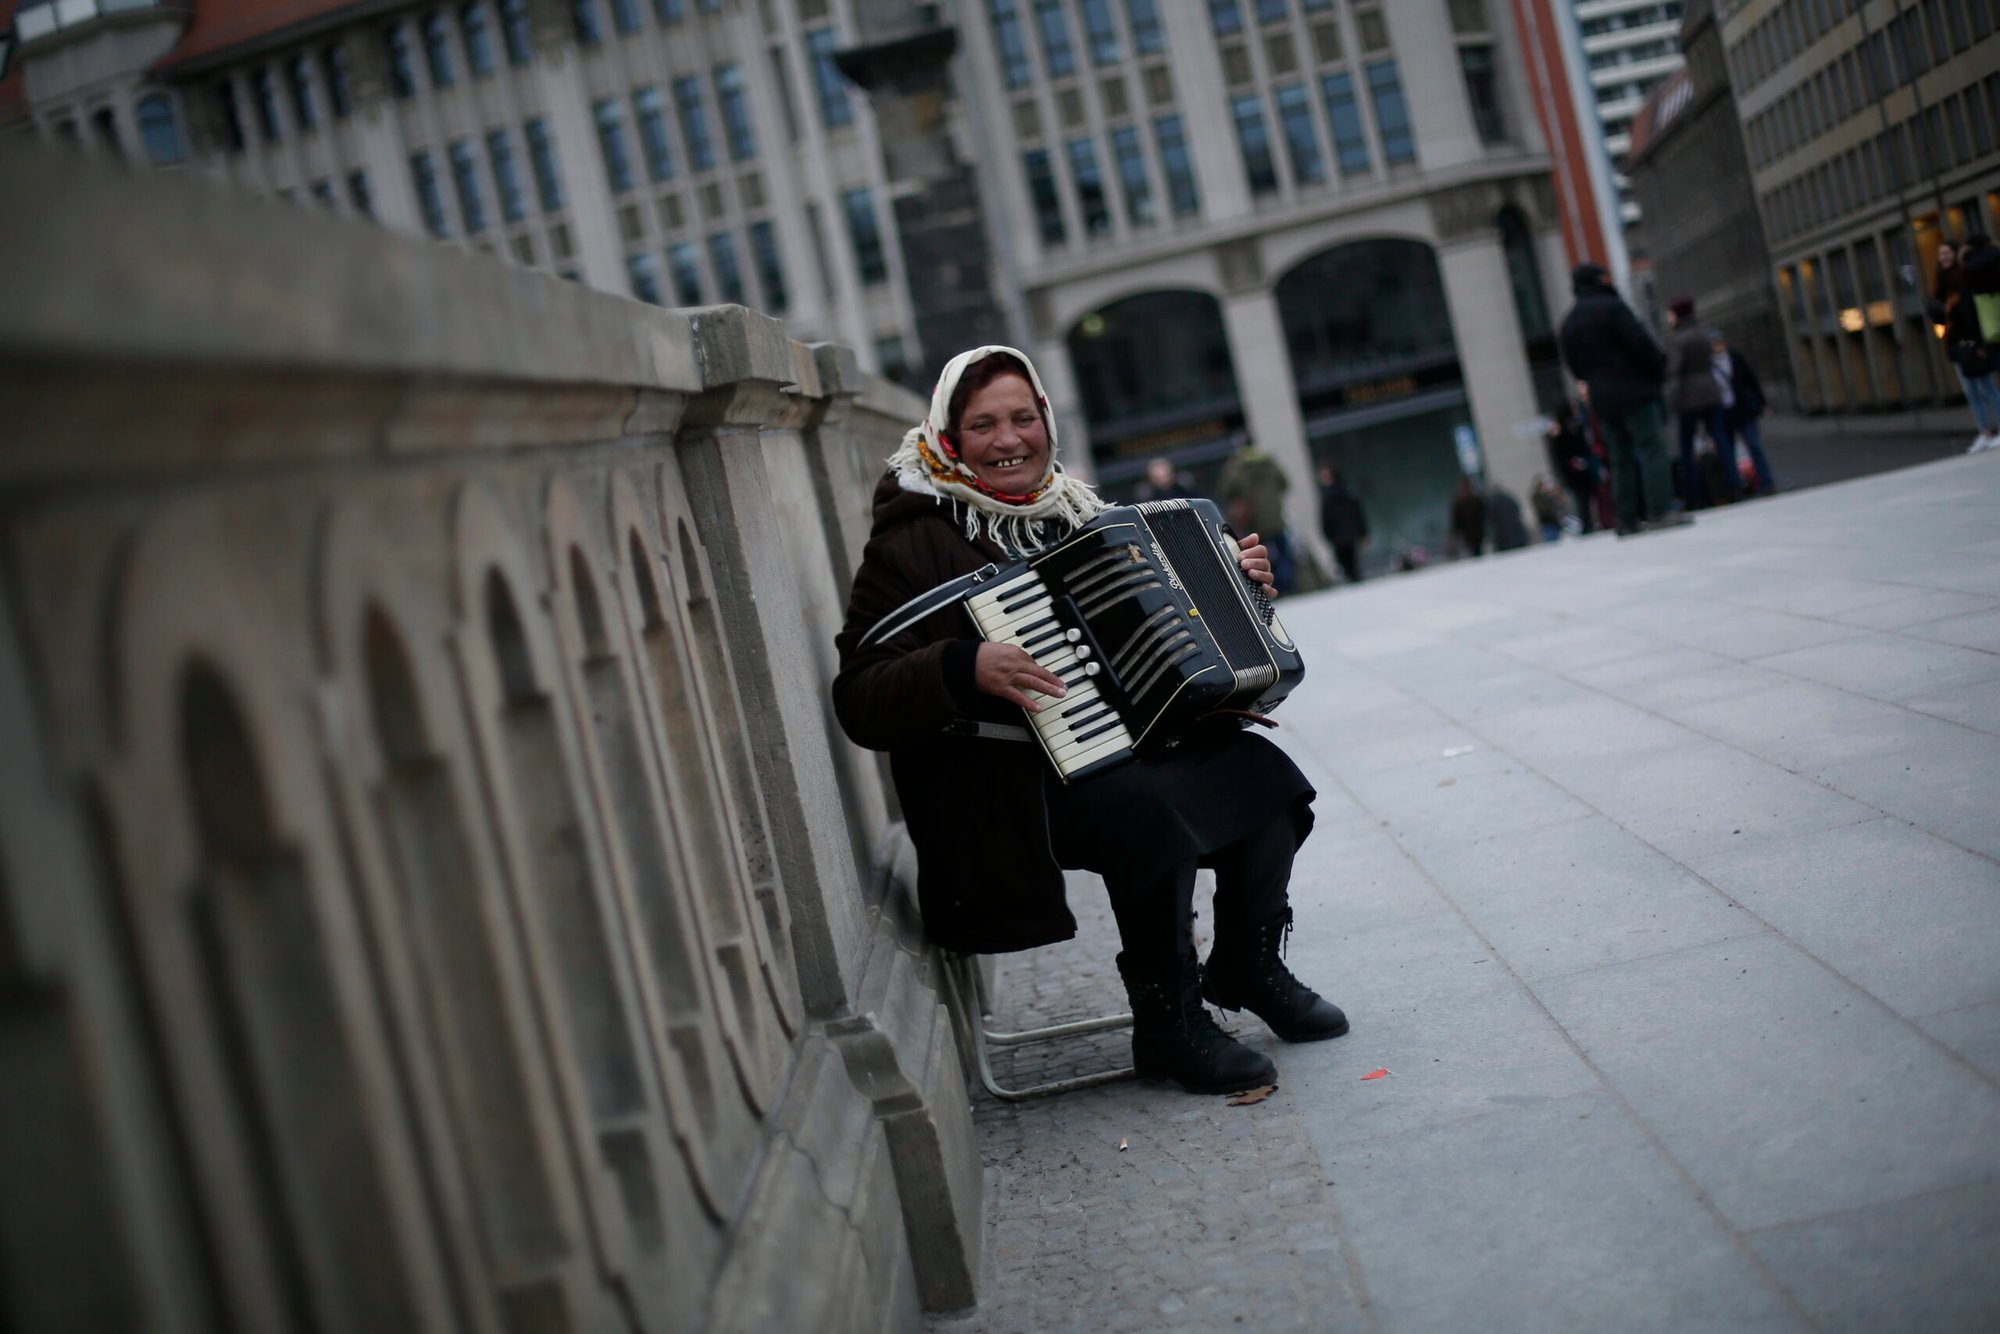 A woman street musician weaves melodies through the streets of Berlin with her accordion.         